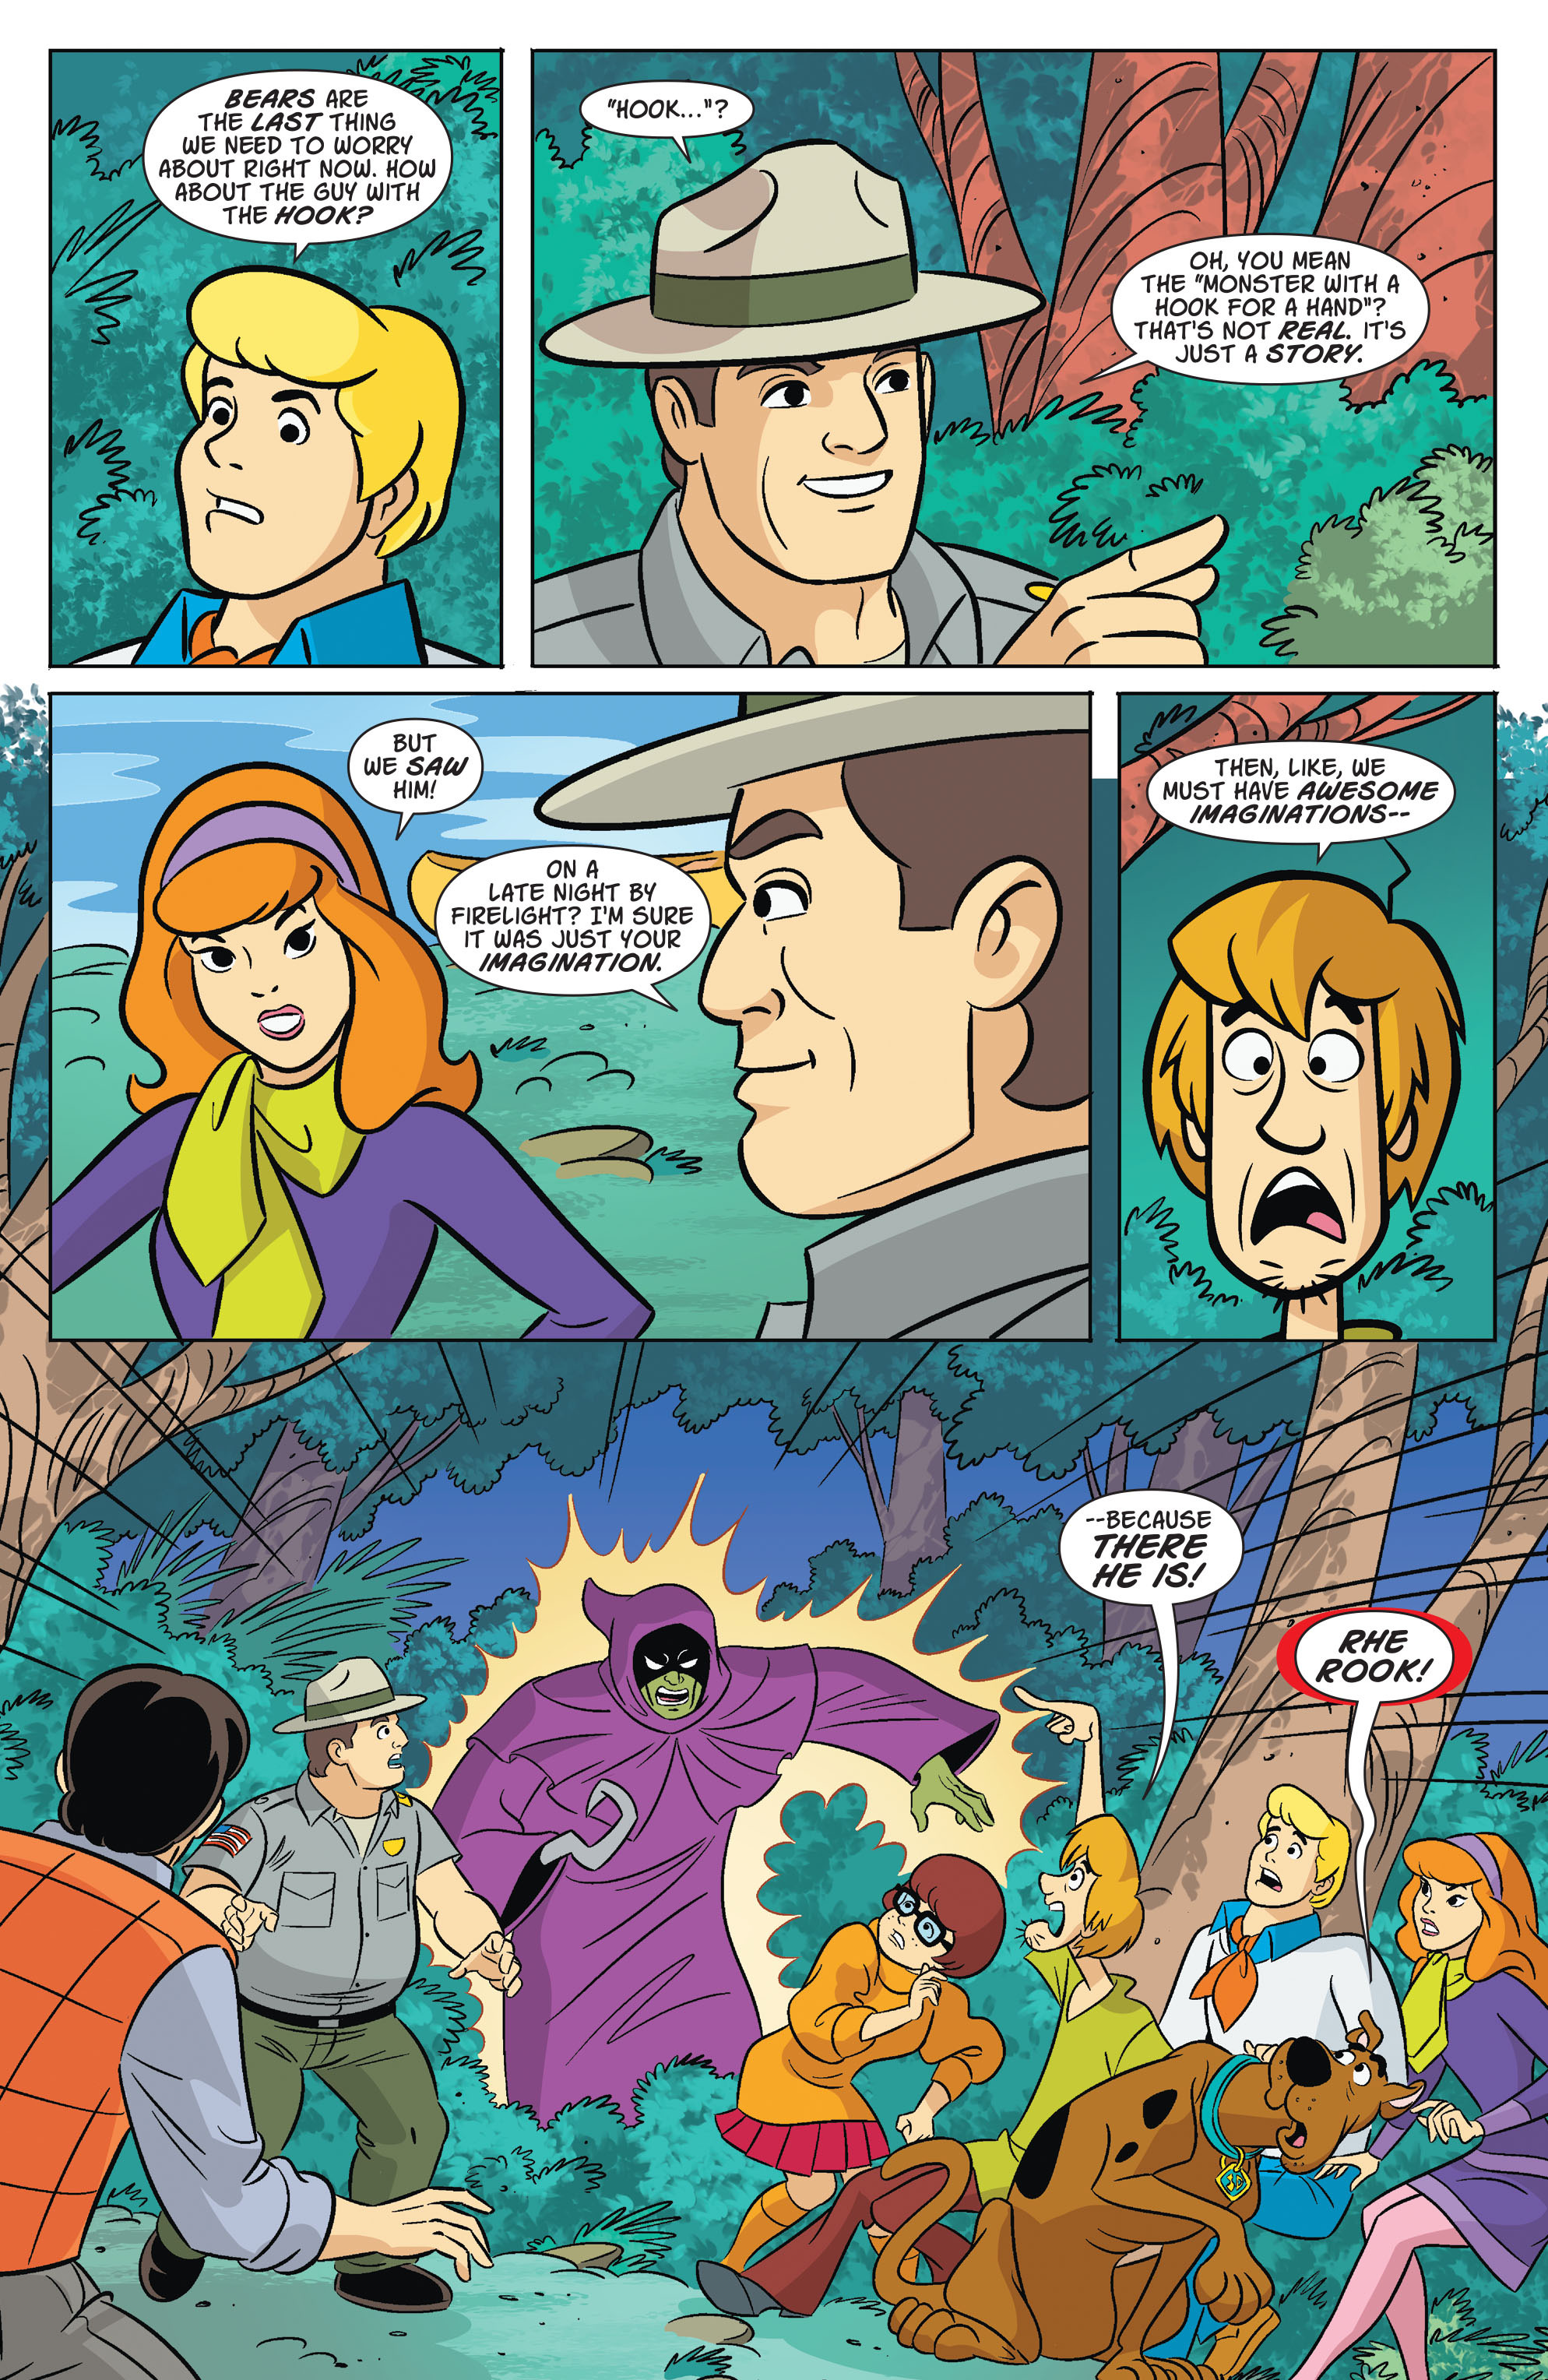 Read Online Scooby Doo Where Are You Comic Issue 67 